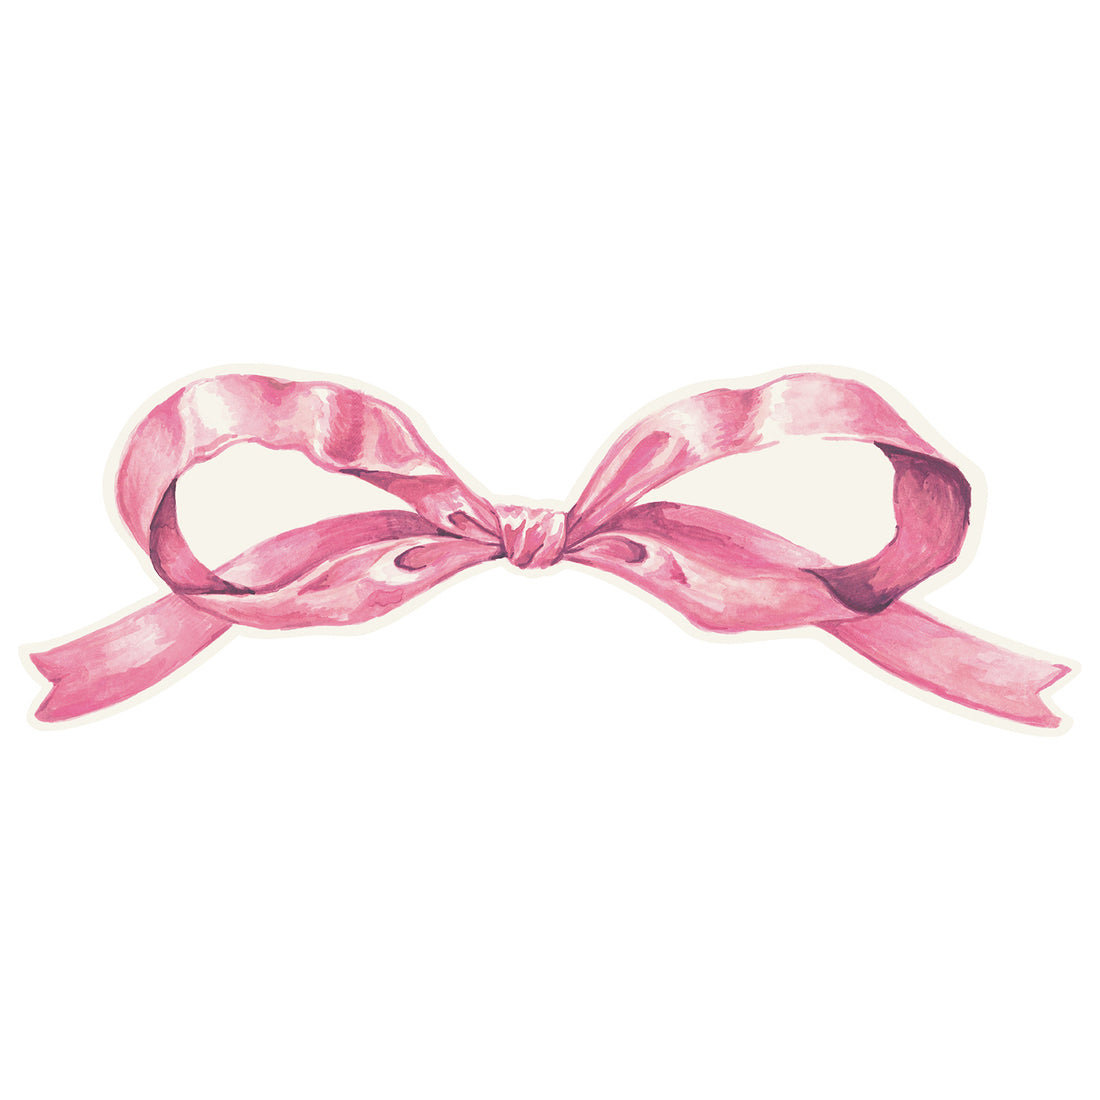 A die-cut illustrated pink ribbon tied into a simple elegant bow.